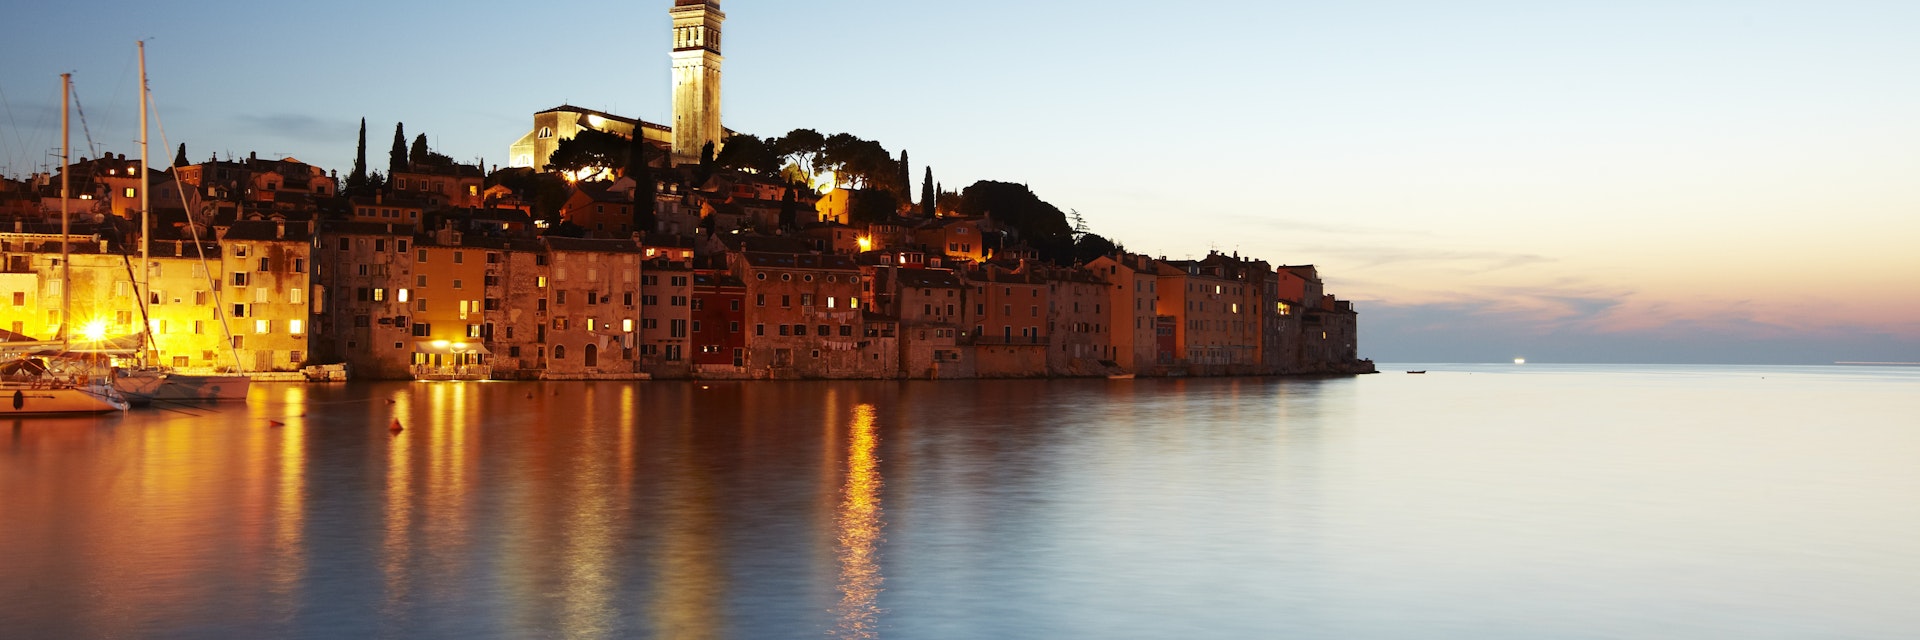 View of port town and tower of Saint Euphemia's basilica at dusk.